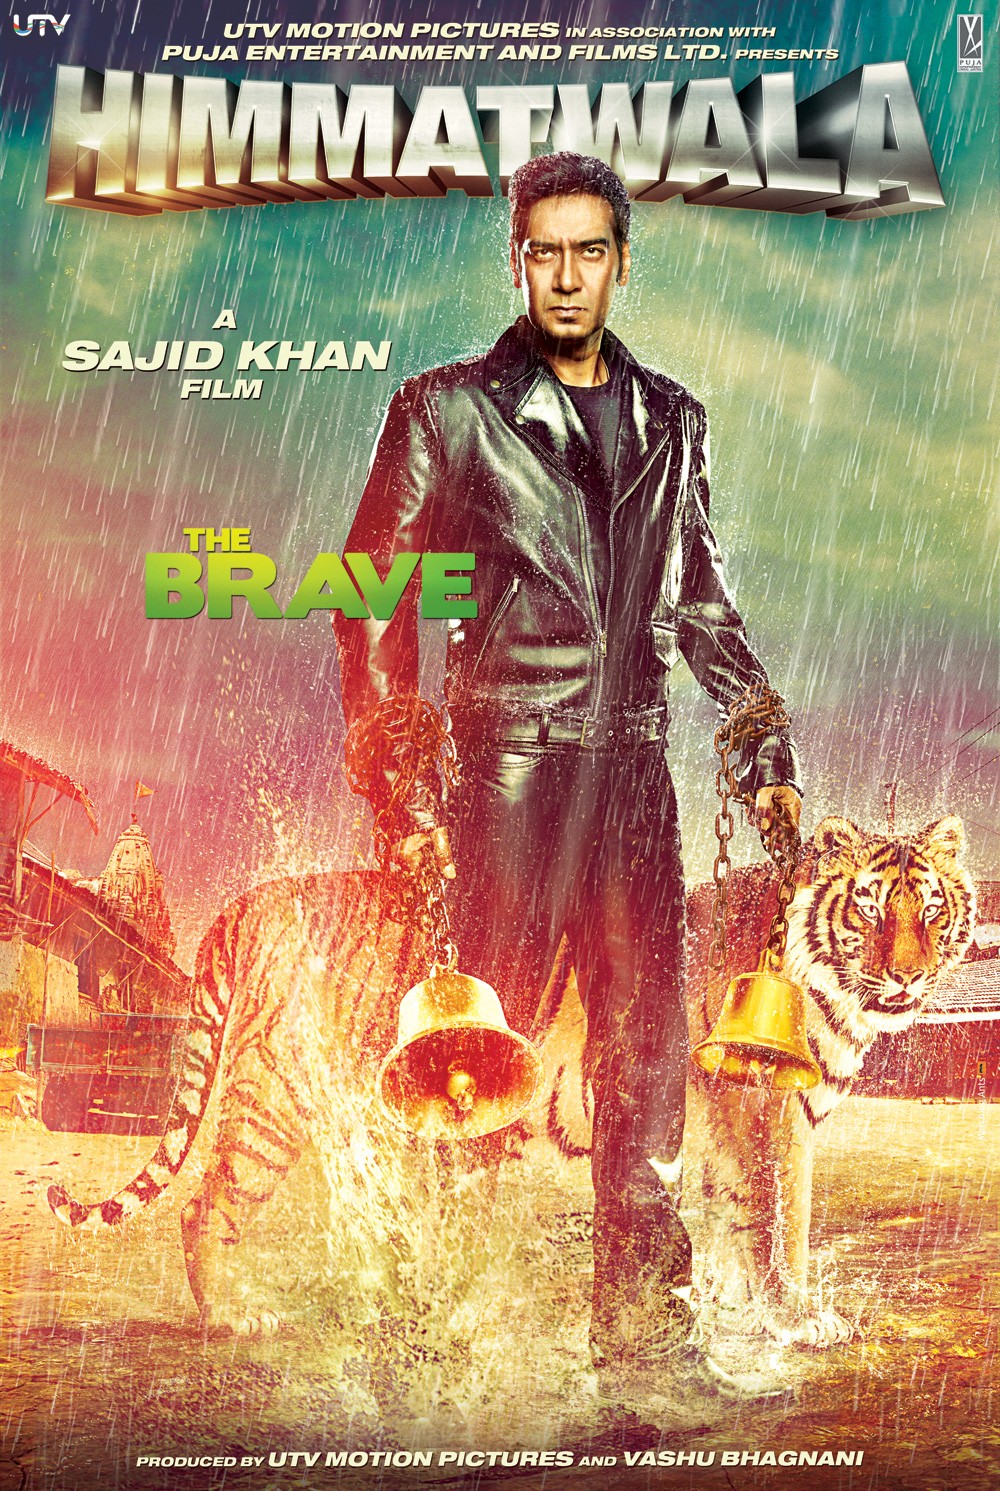 Extra Large Movie Poster Image for Himmatwala (#1 of 6)